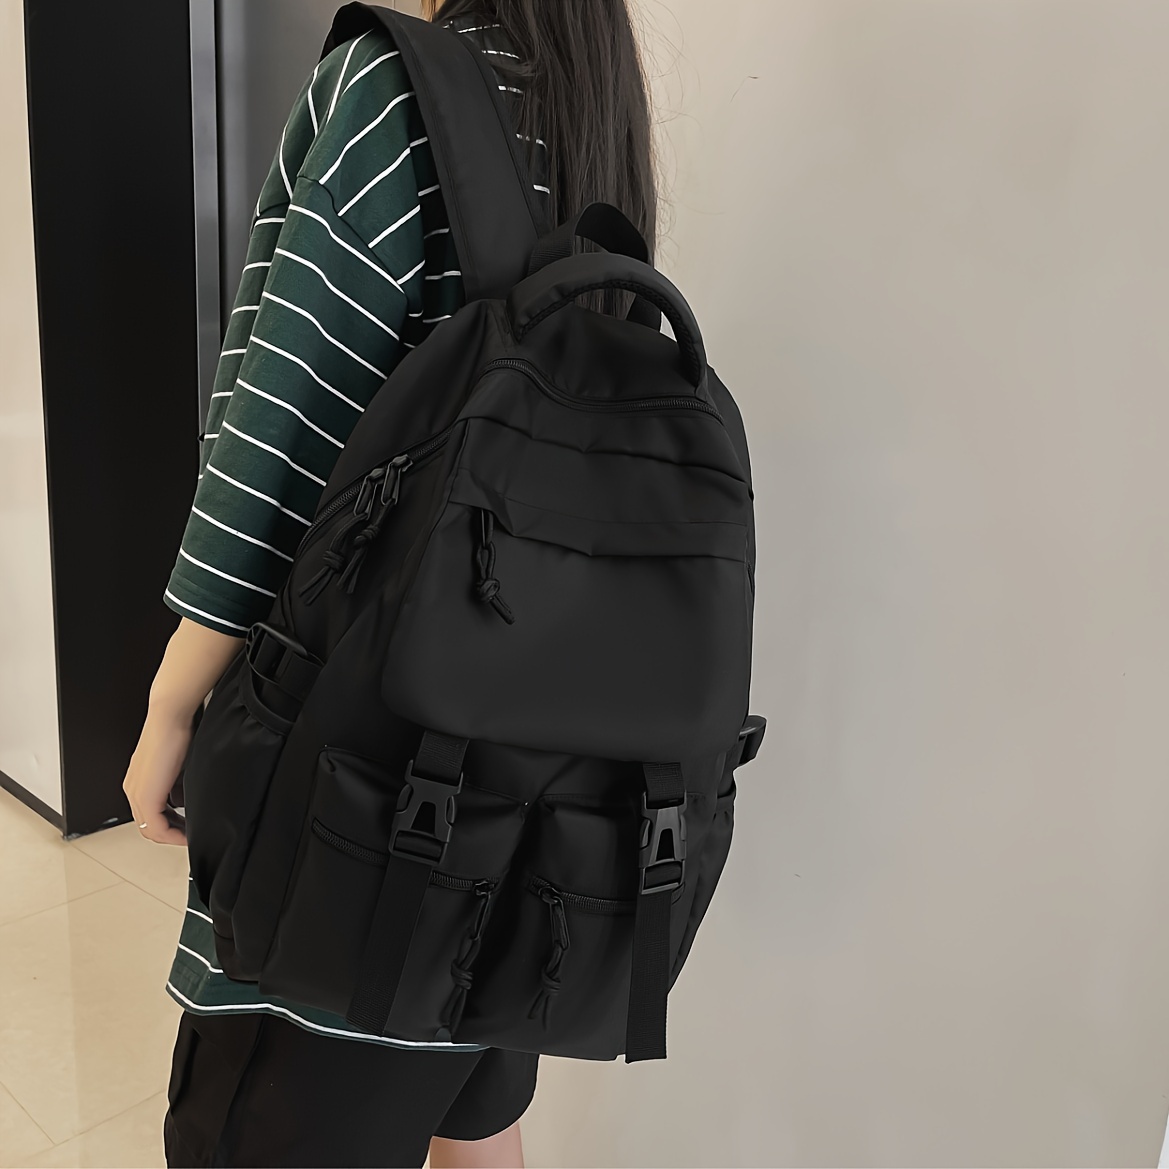 

1pc Women's Stylish Nylon Backpack With Adjustable Straps, Lightweight Multi-compartment Bag With Release Buckles, Perfect For College & Travel